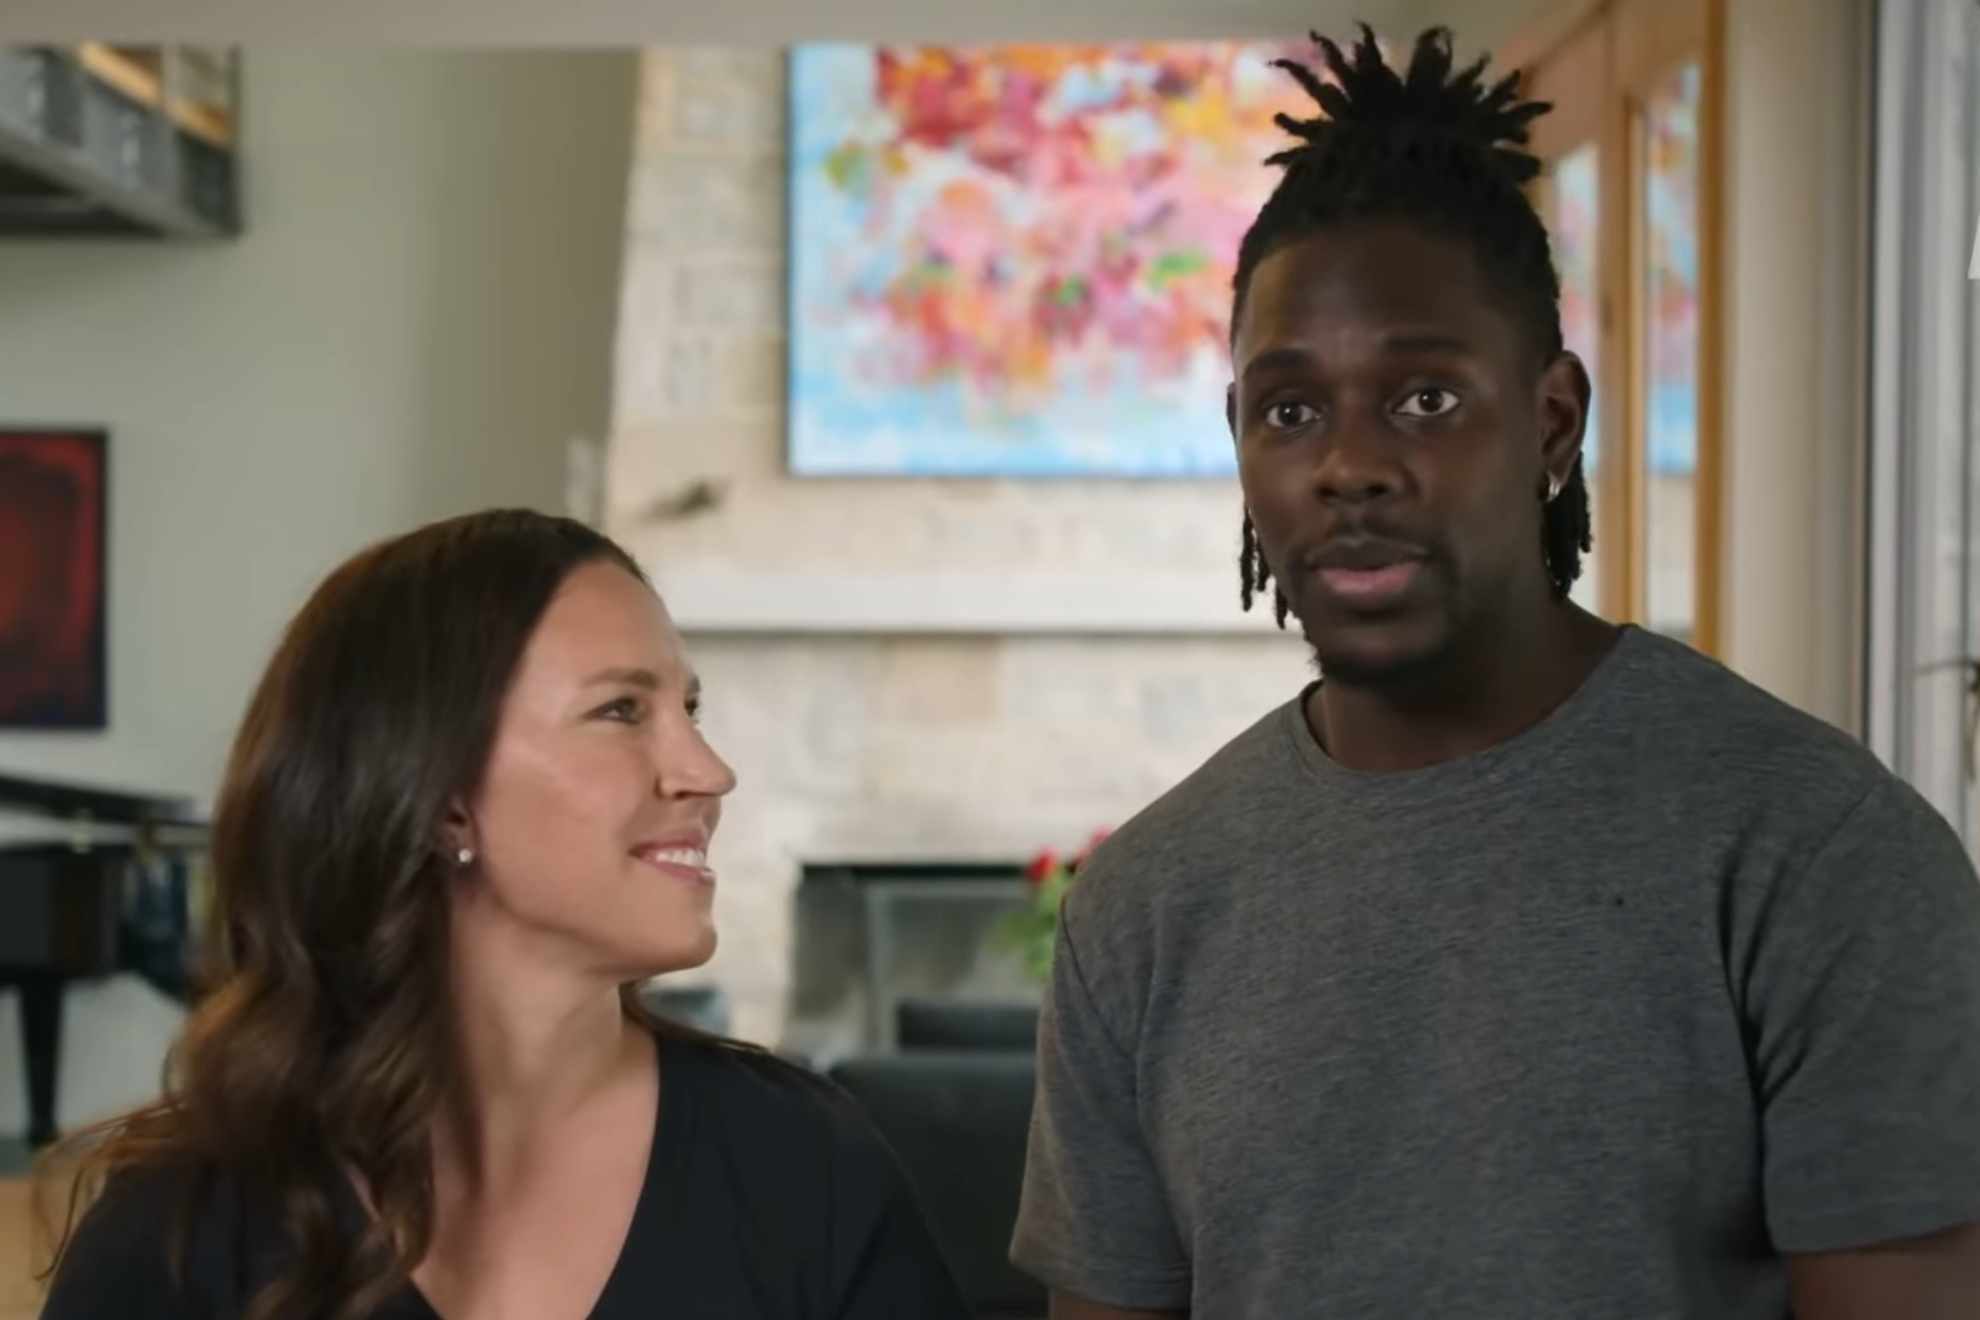 Former USWNT icon Lauren Holiday and NBA's Jrue Holiday have fallen victims to a scam worth millions of dollars.